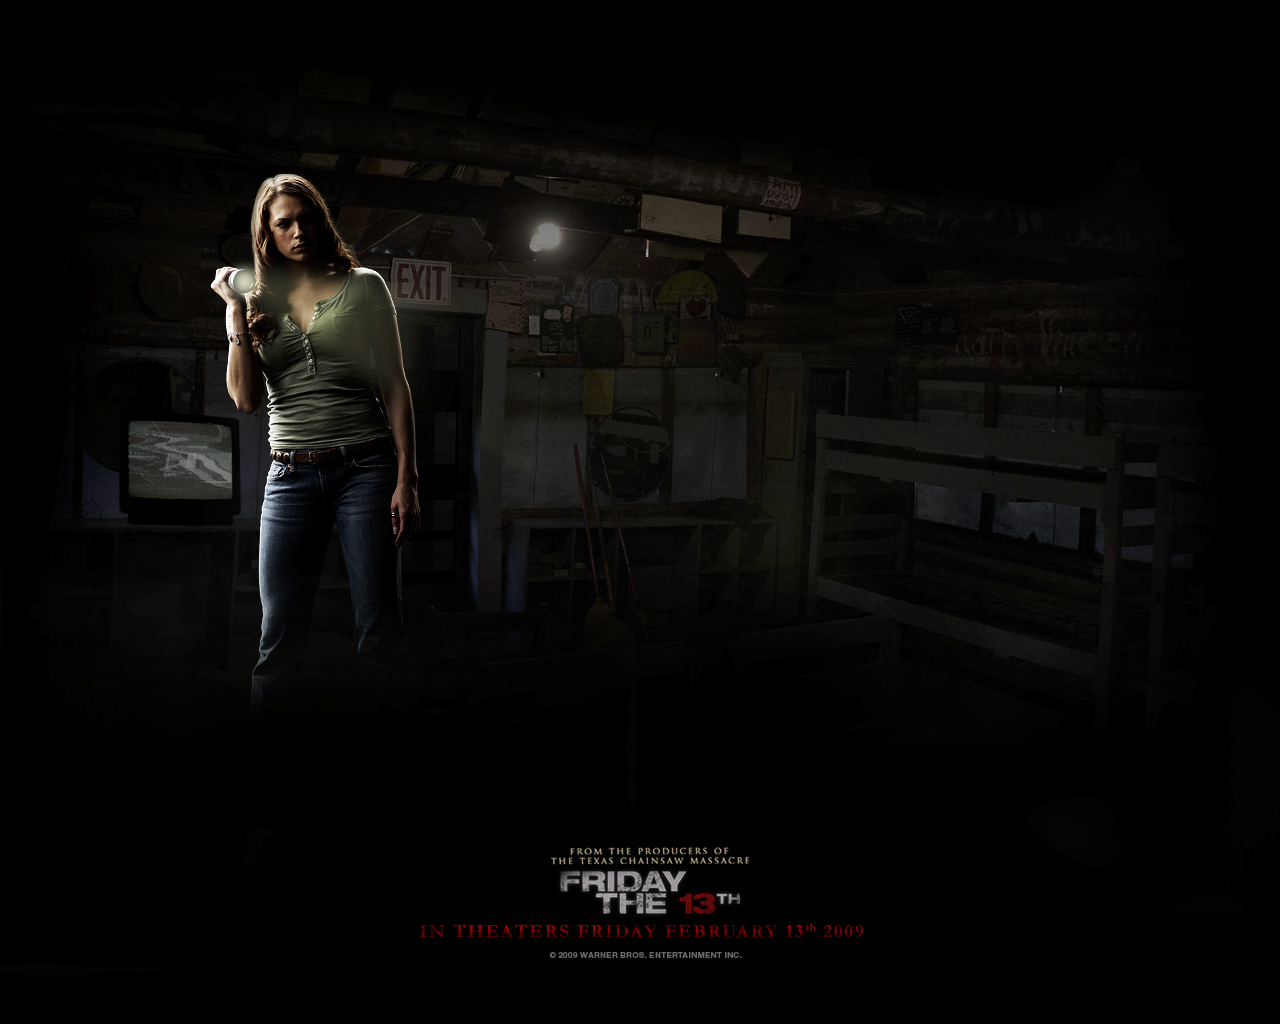 Download HQ Friday The 13th wallpaper / Movies / 1280x1024